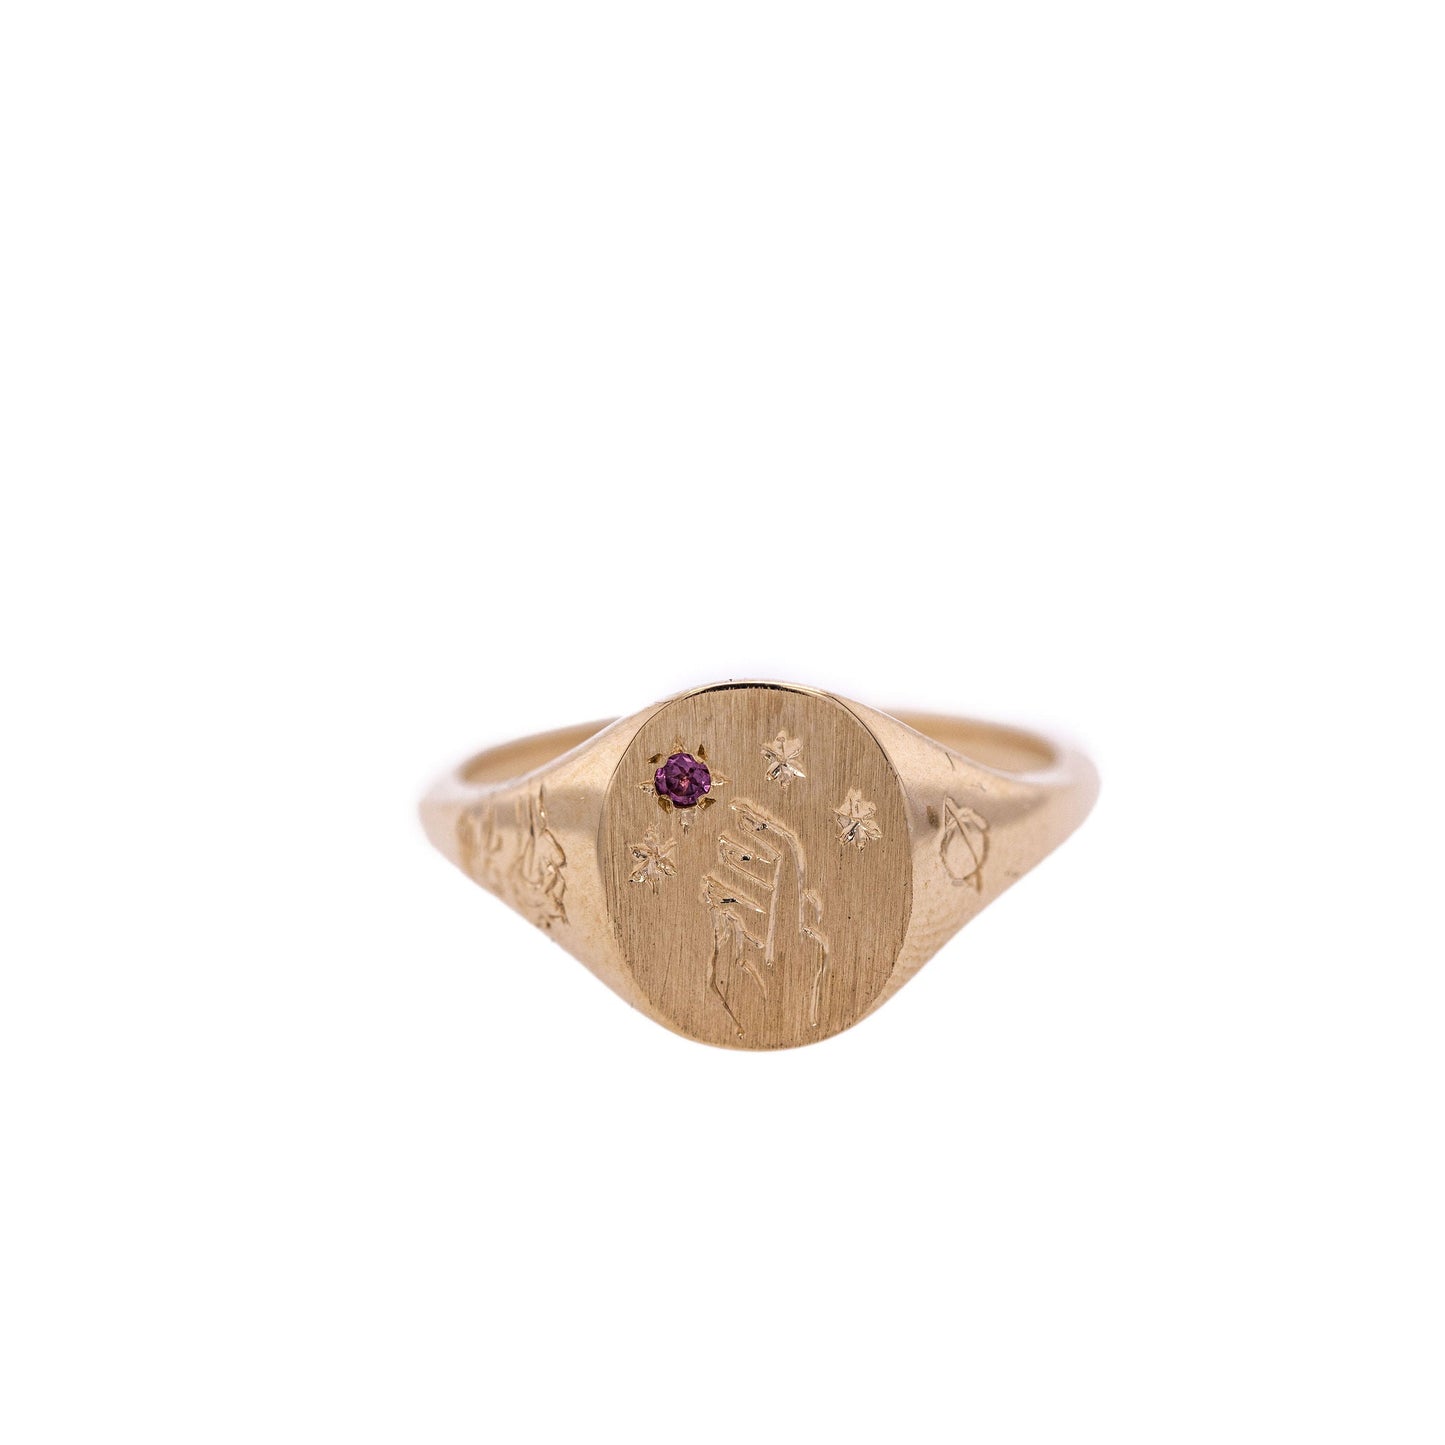 Rhodolite Garnet Hand-engraved gold signet ring with intricate design on a clean white background